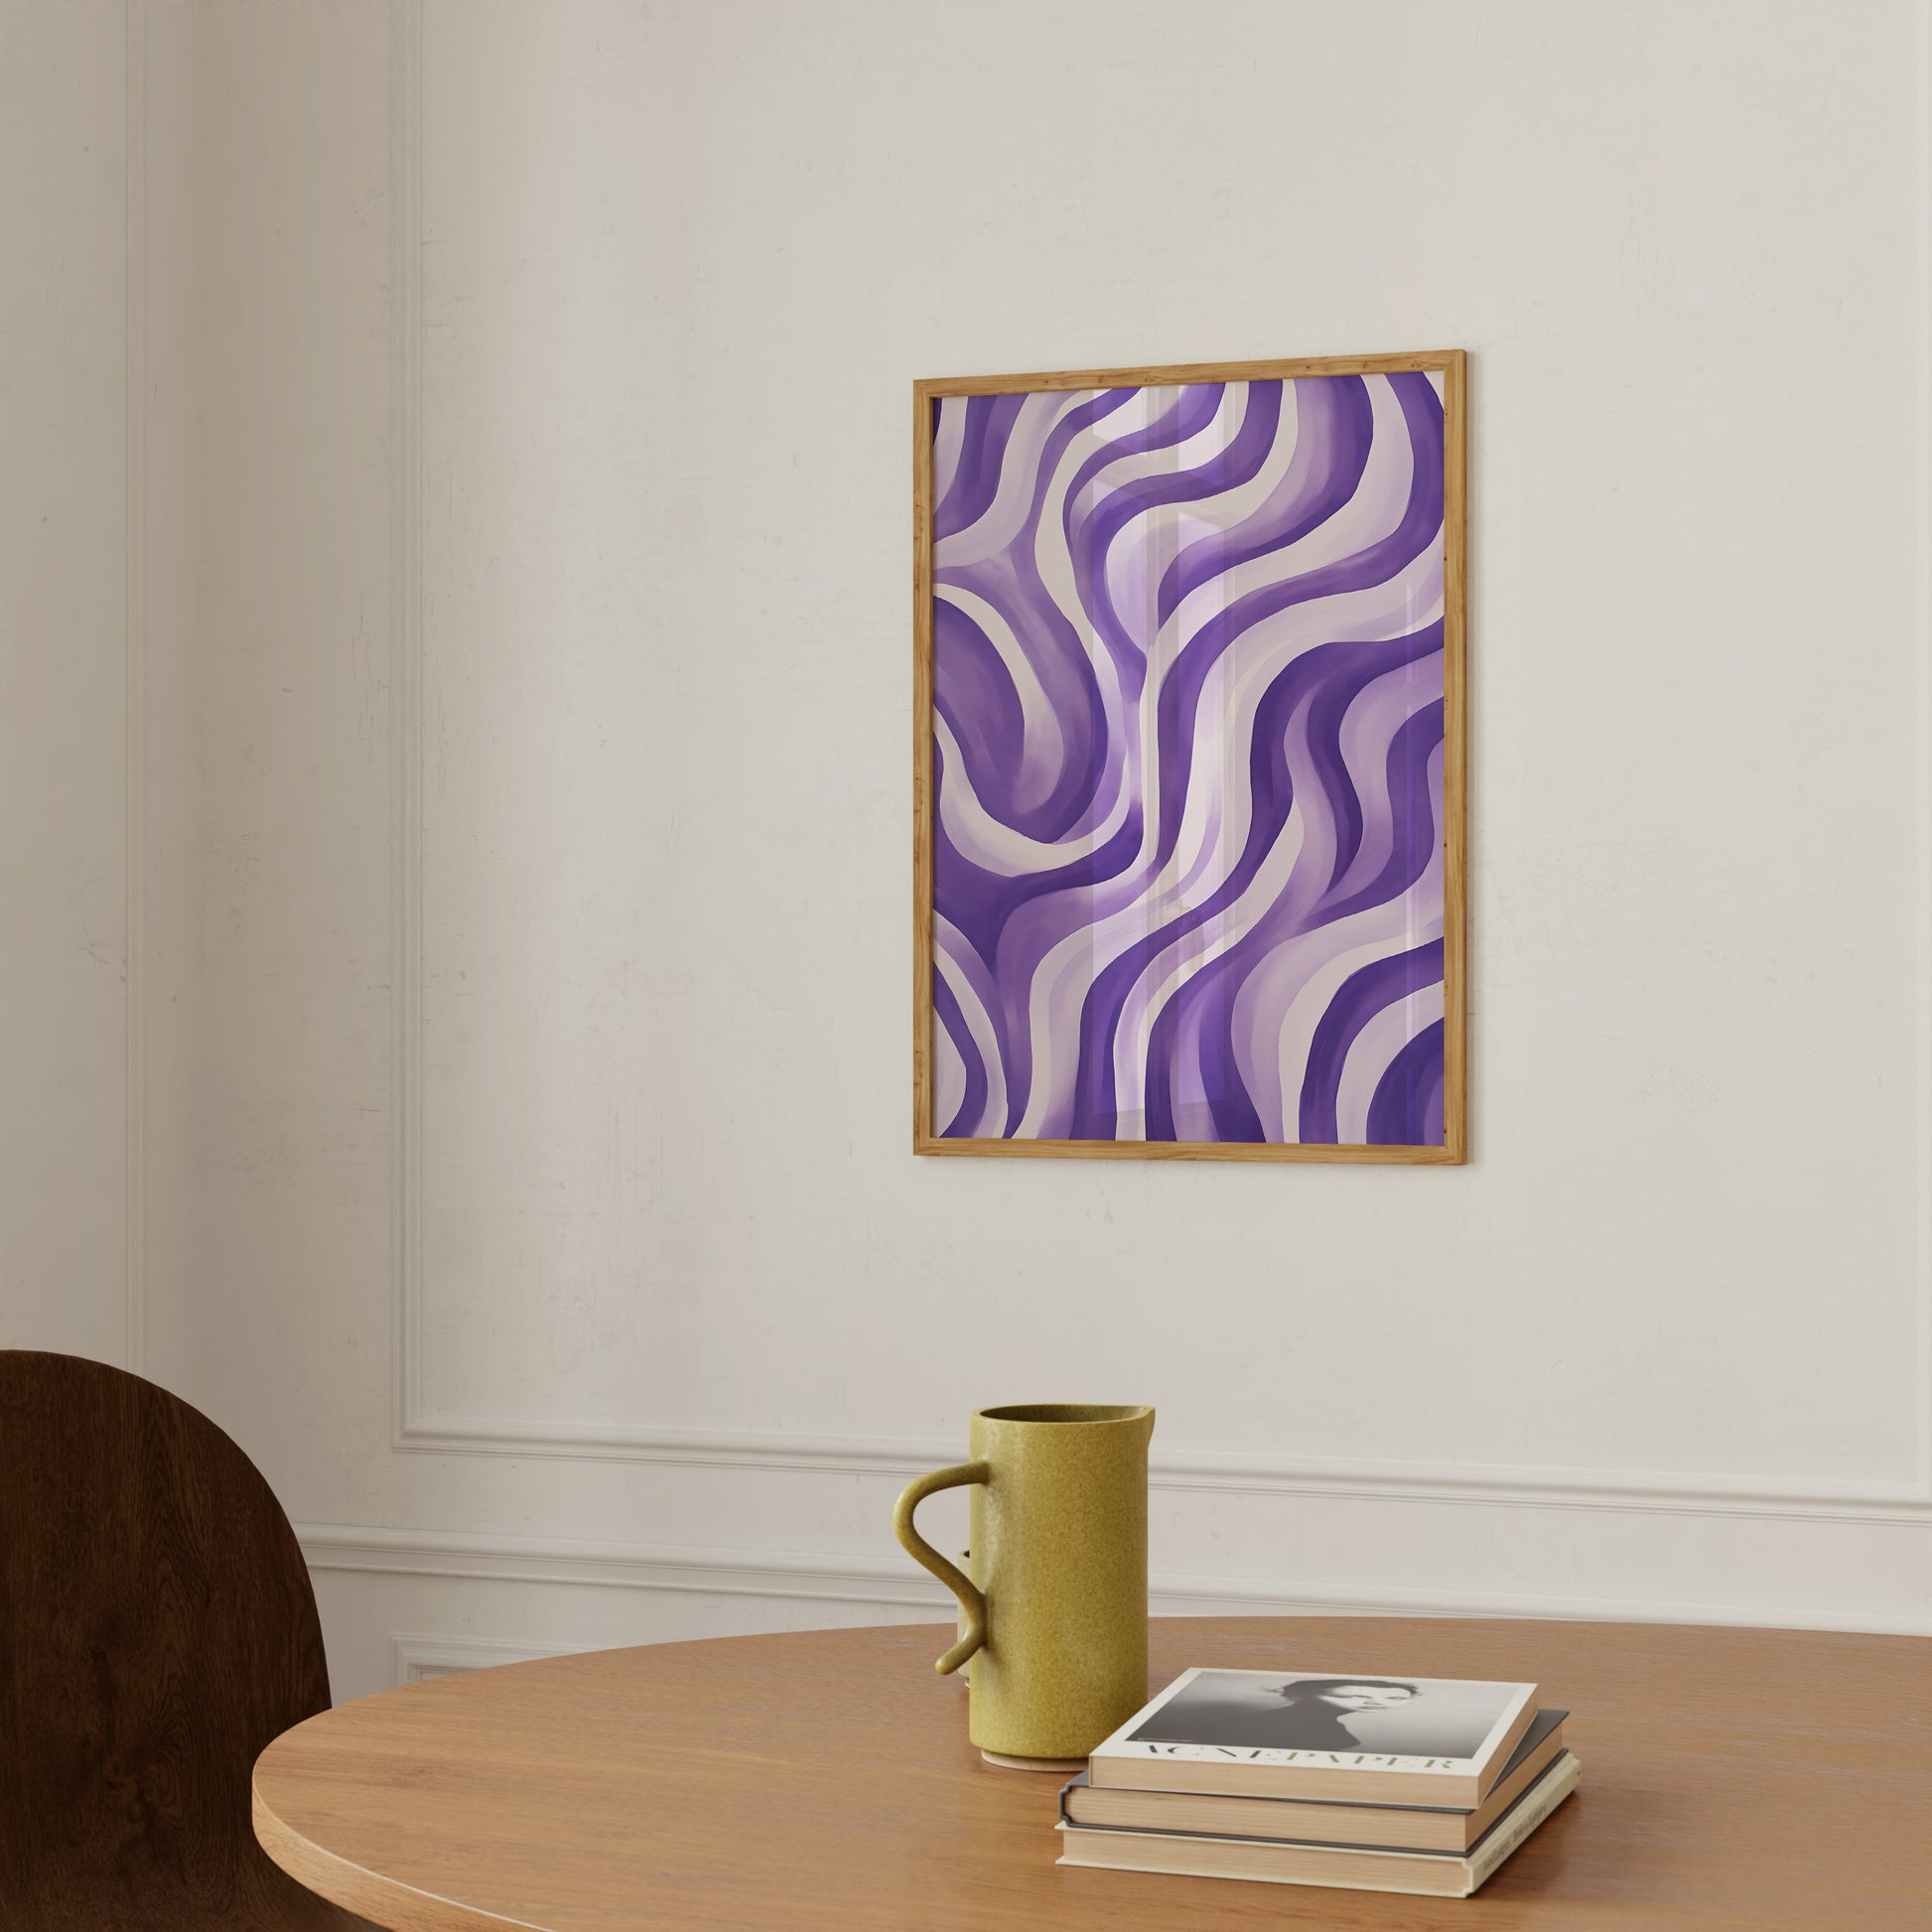 Abstract purple artwork on a wall above a table with a yellow mug and books.